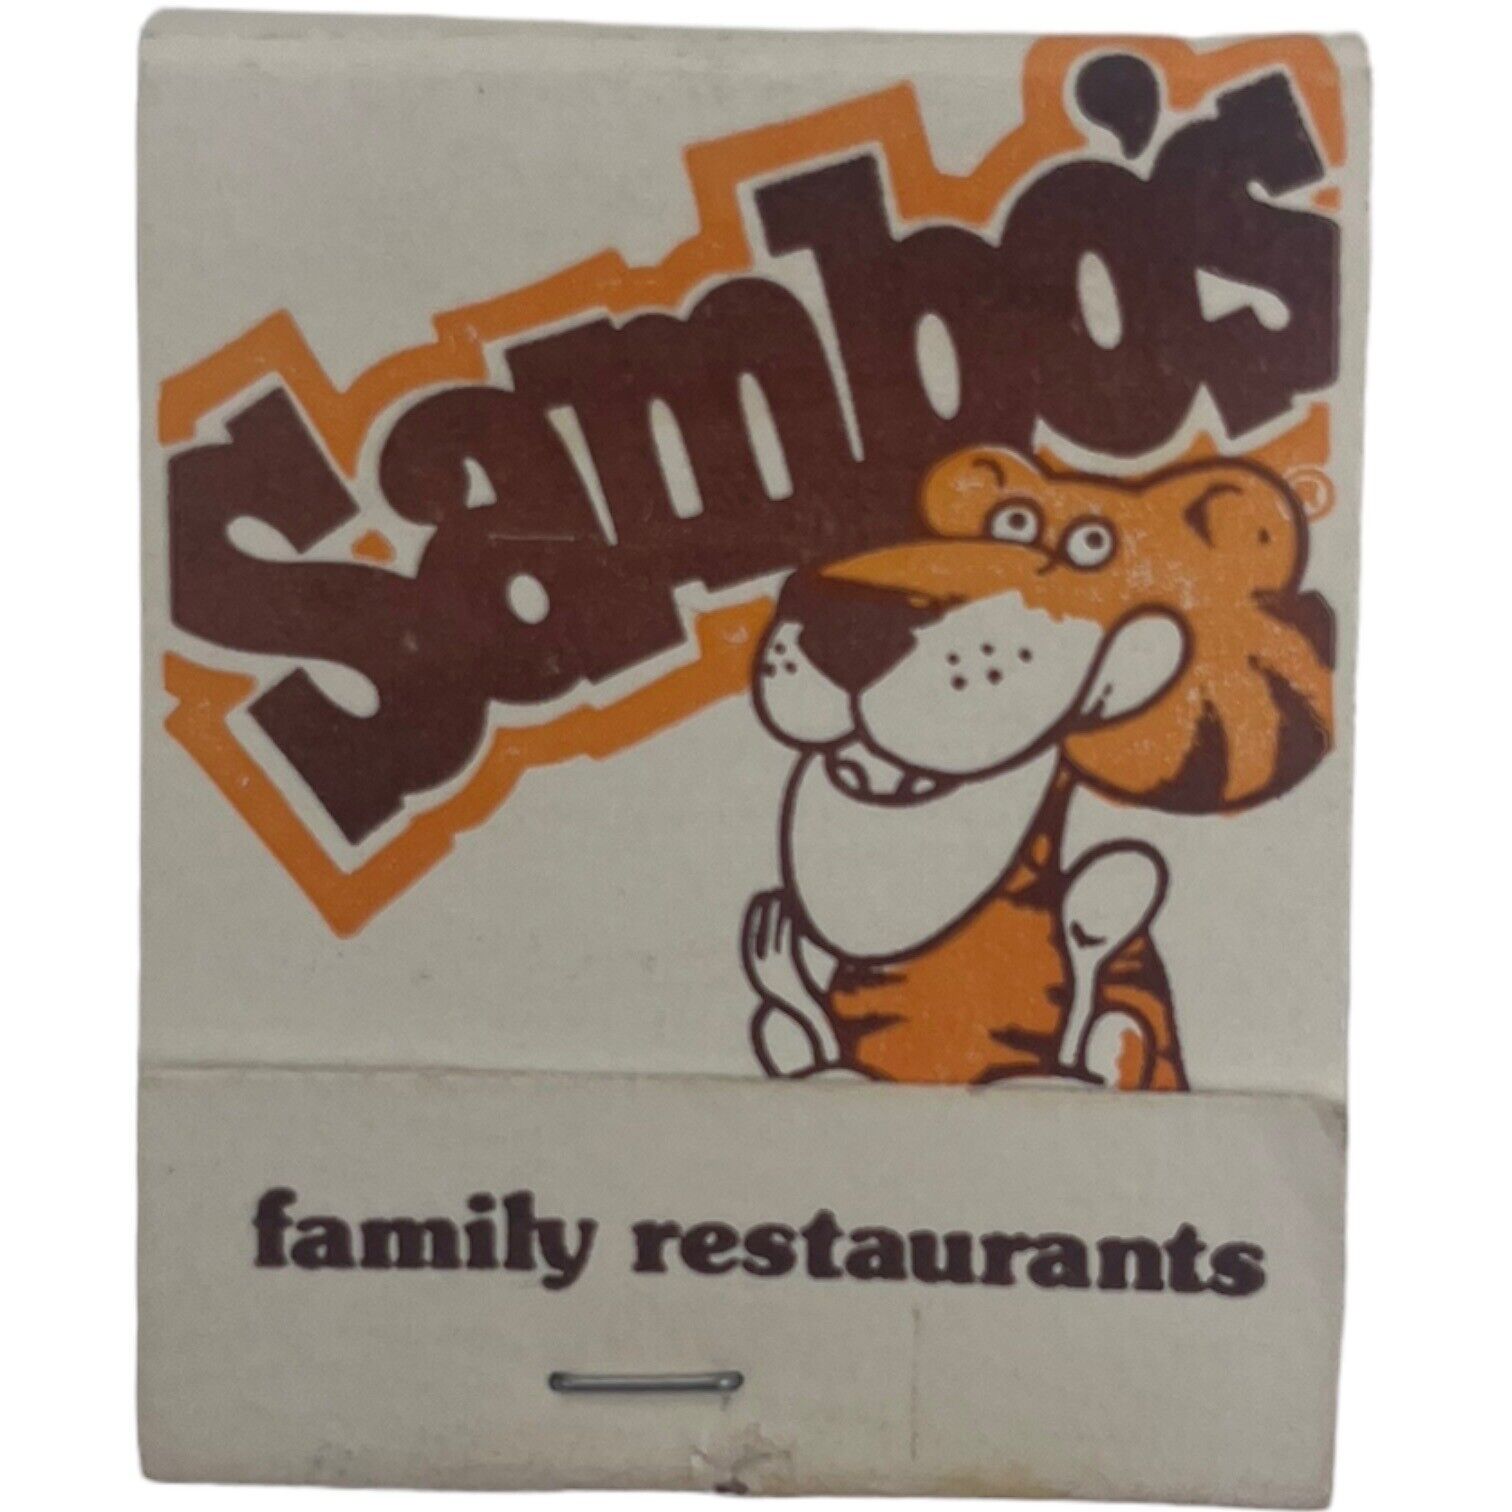 Vintage Sambo\'s Family Restaurants Matchbook Matches 1974 To 1984 Tiger Graphic